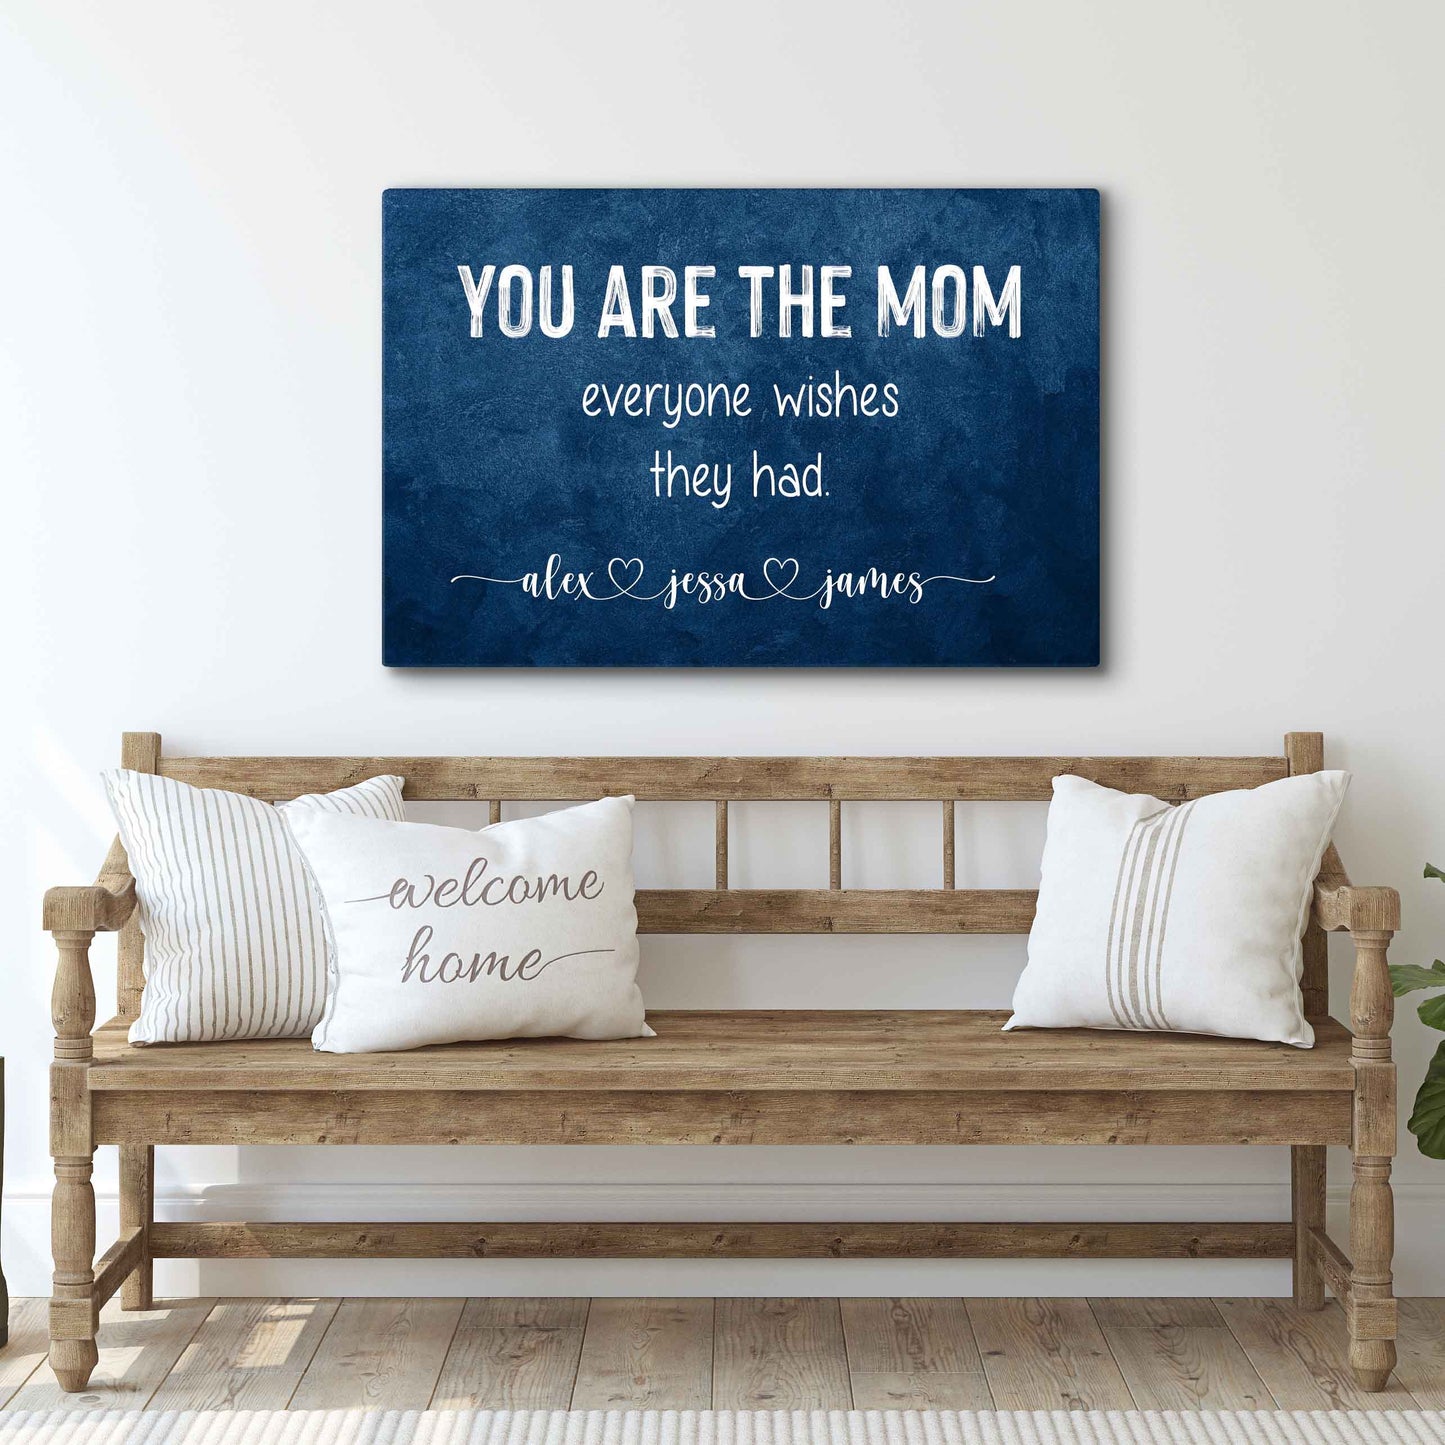 You Are The MOM everyone wishes Sign - Image by Tailored Canvases